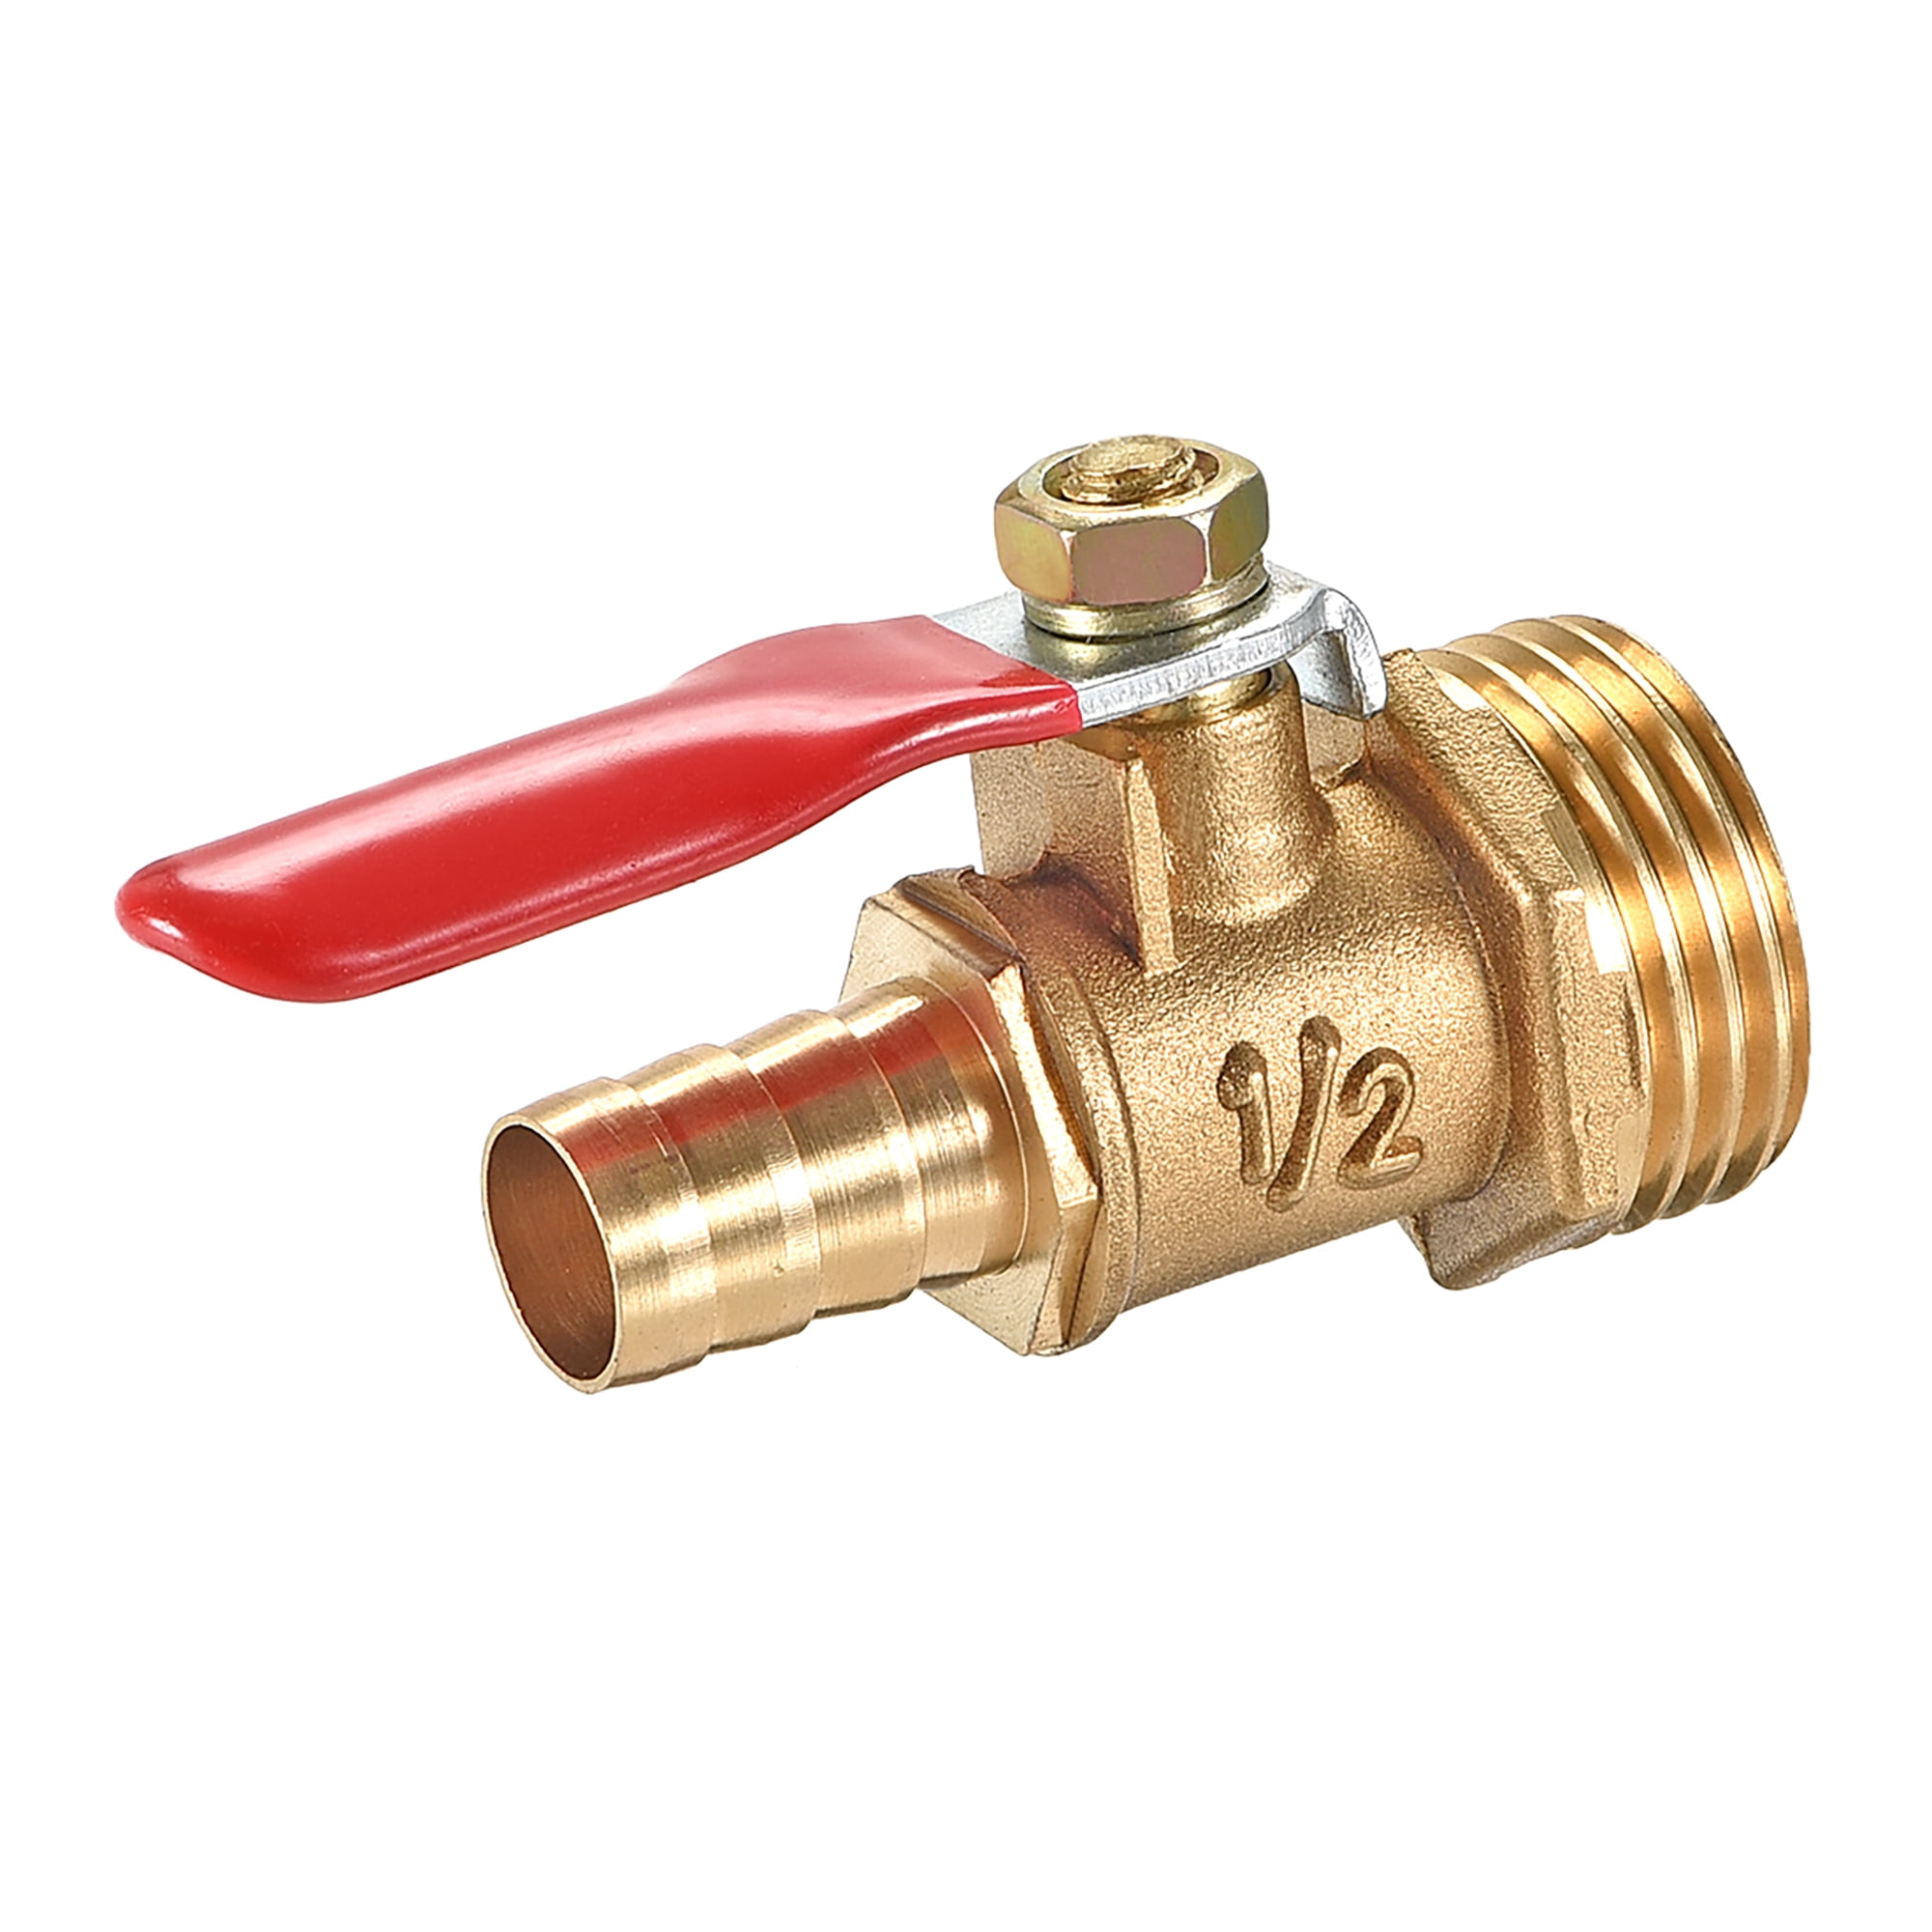 Male to Female Thread Ball Valve air Compressor for Valve Switch air Pump Outlet 5 pcs G1 / 2 Thick Brass Ball Valve